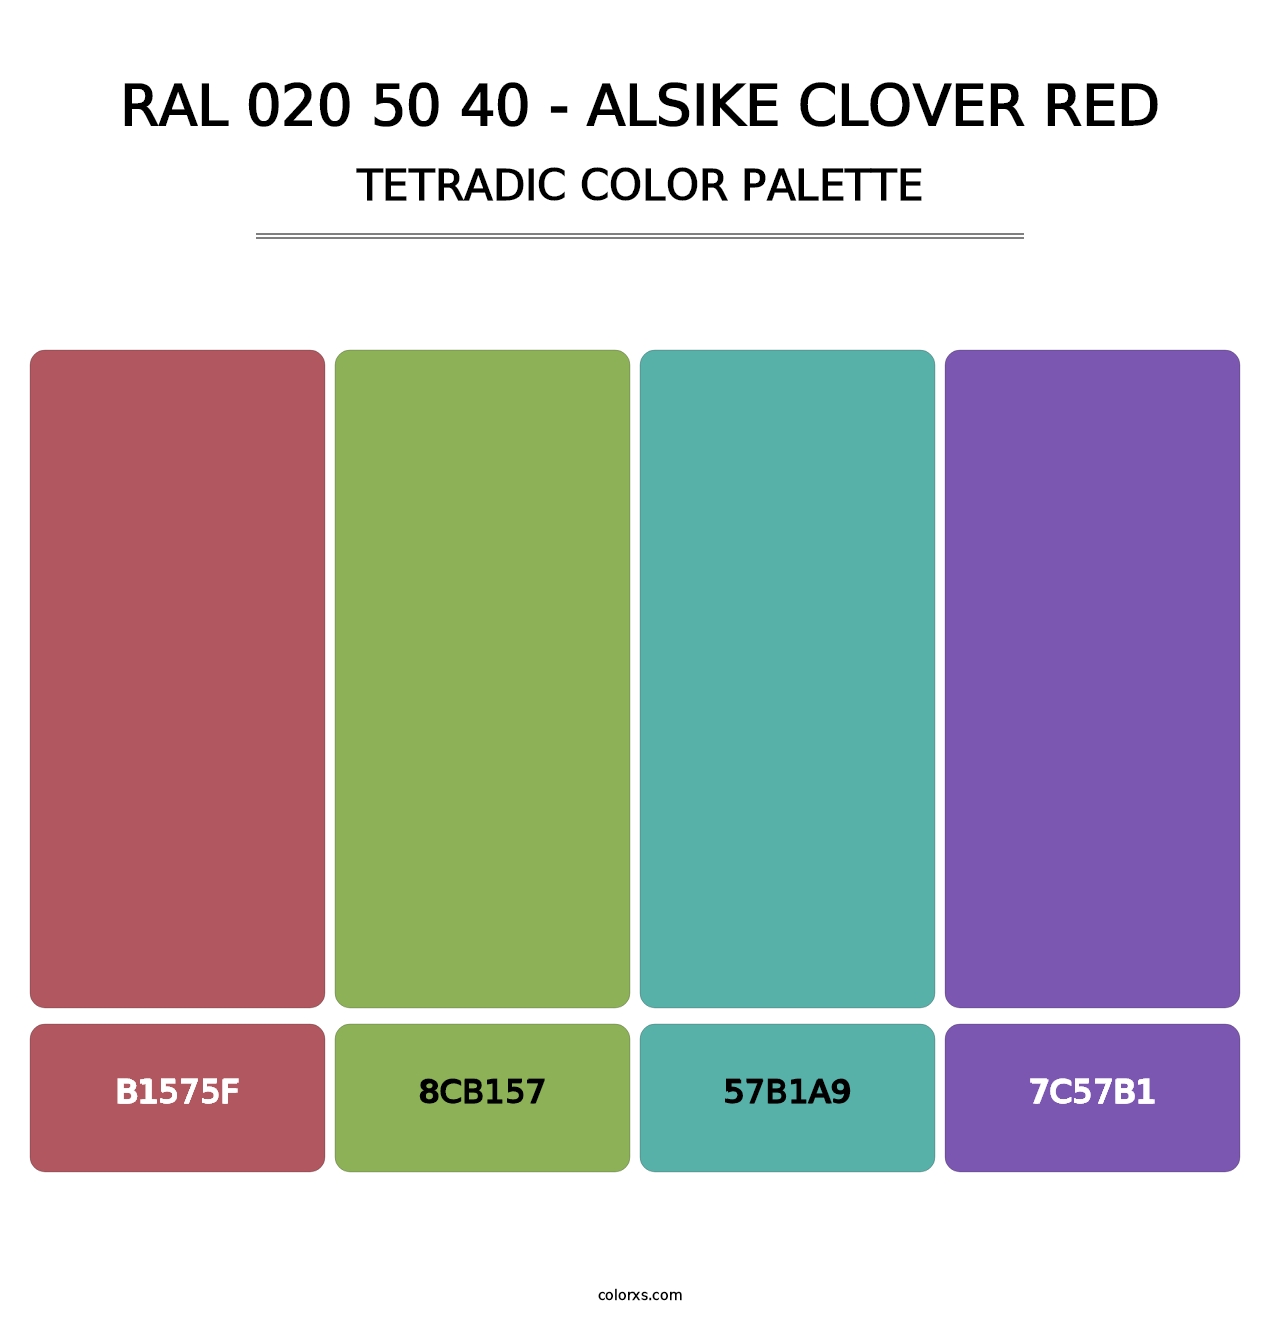 RAL 020 50 40 - Alsike Clover Red - Tetradic Color Palette